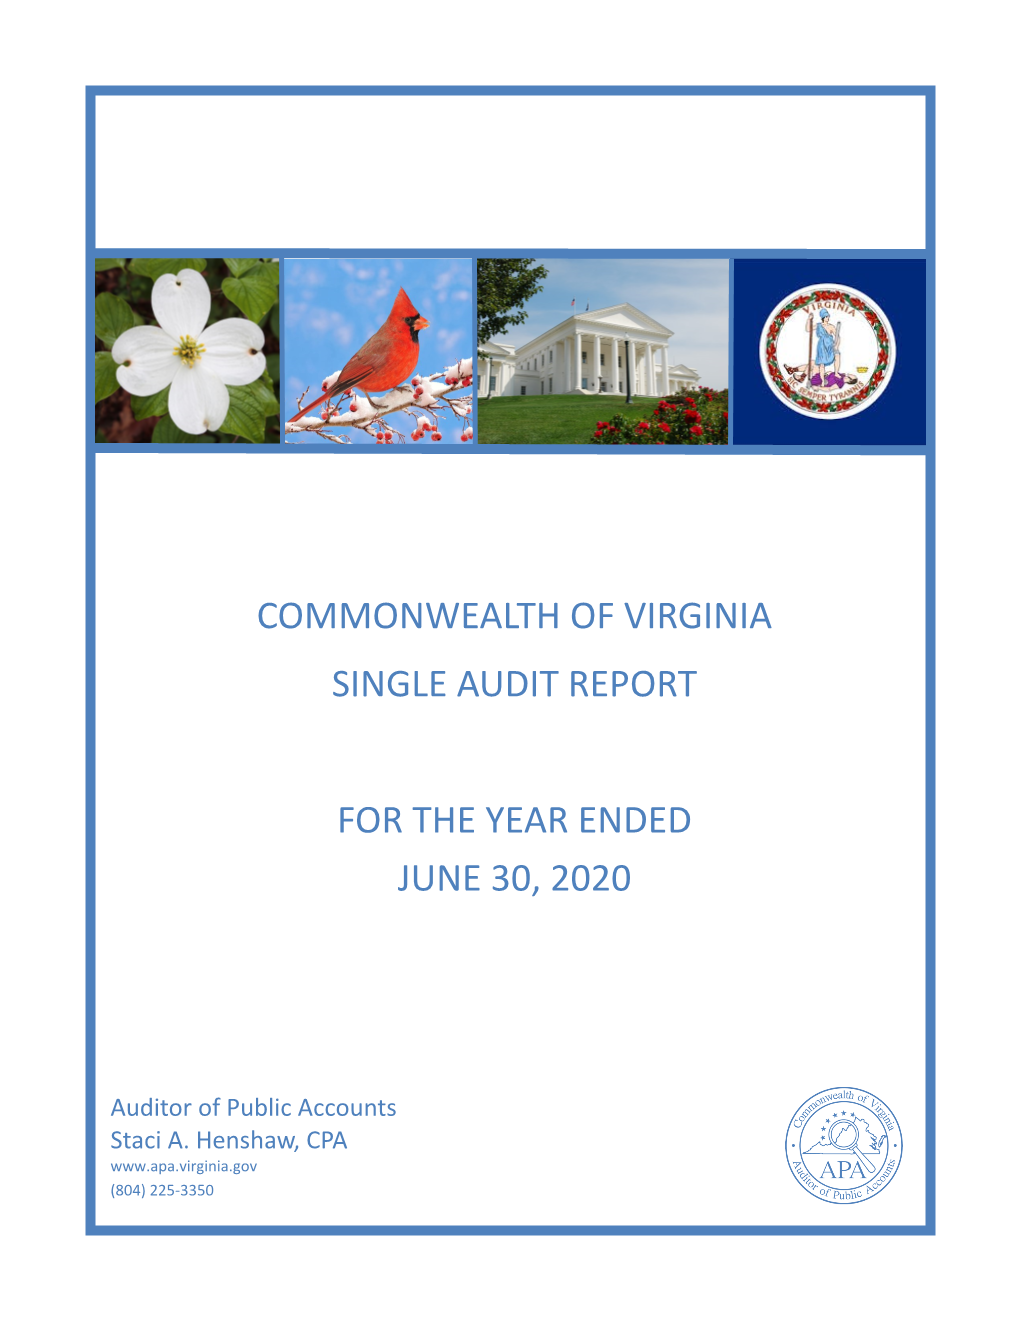 Commonwealth of Virginia Single Audit Report for the Year Ended June 30